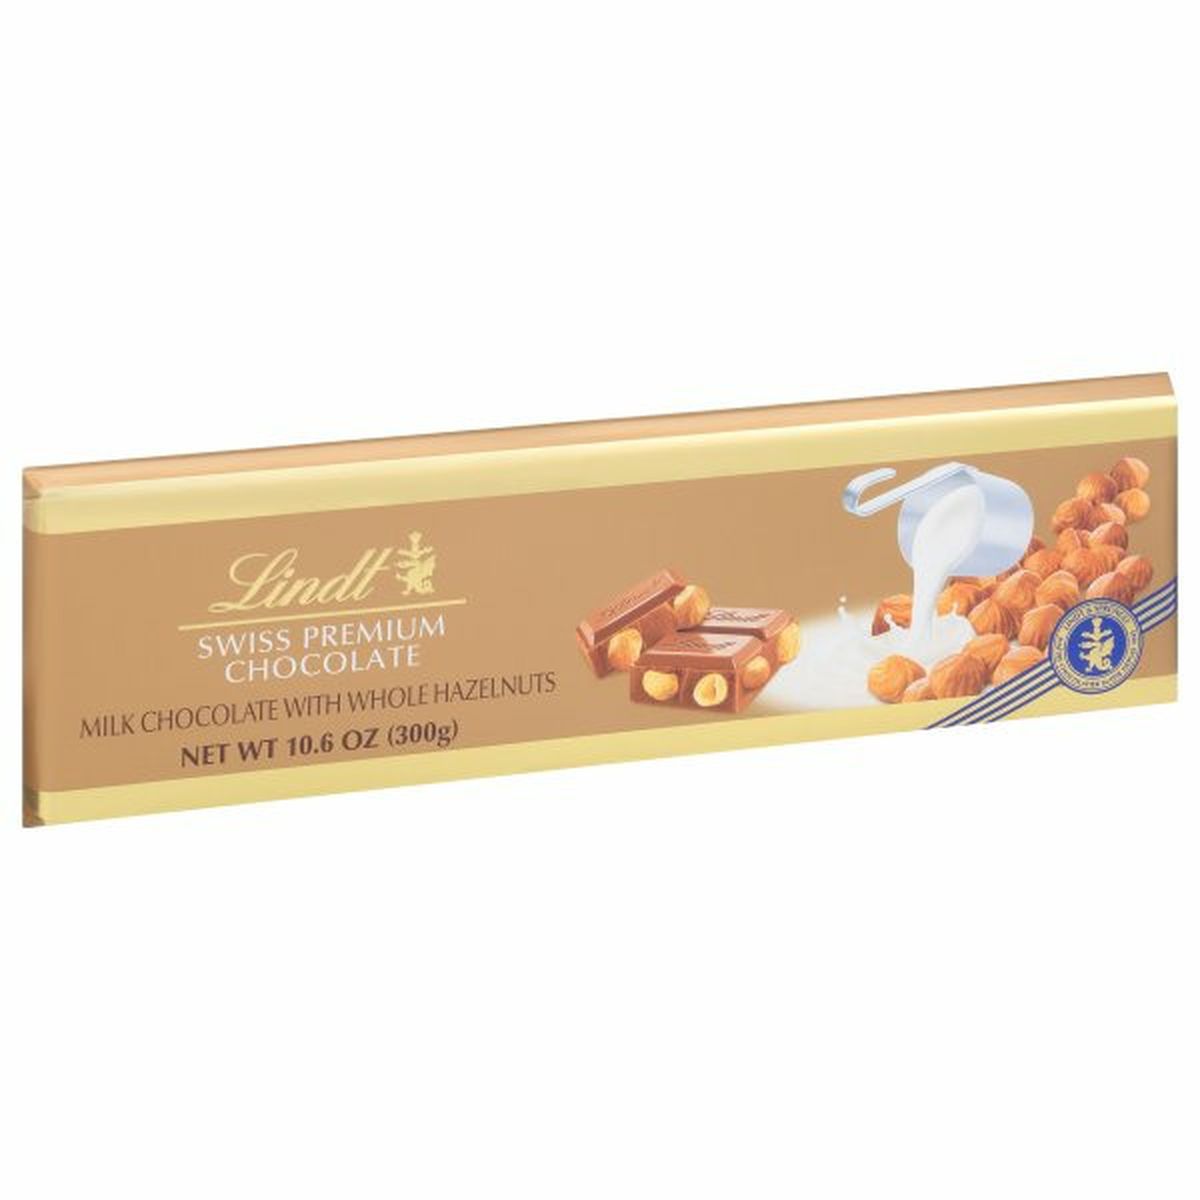 Calories in Lindt Swiss Premium Chocolate, Milk Chocolate with Whole Hazelnuts